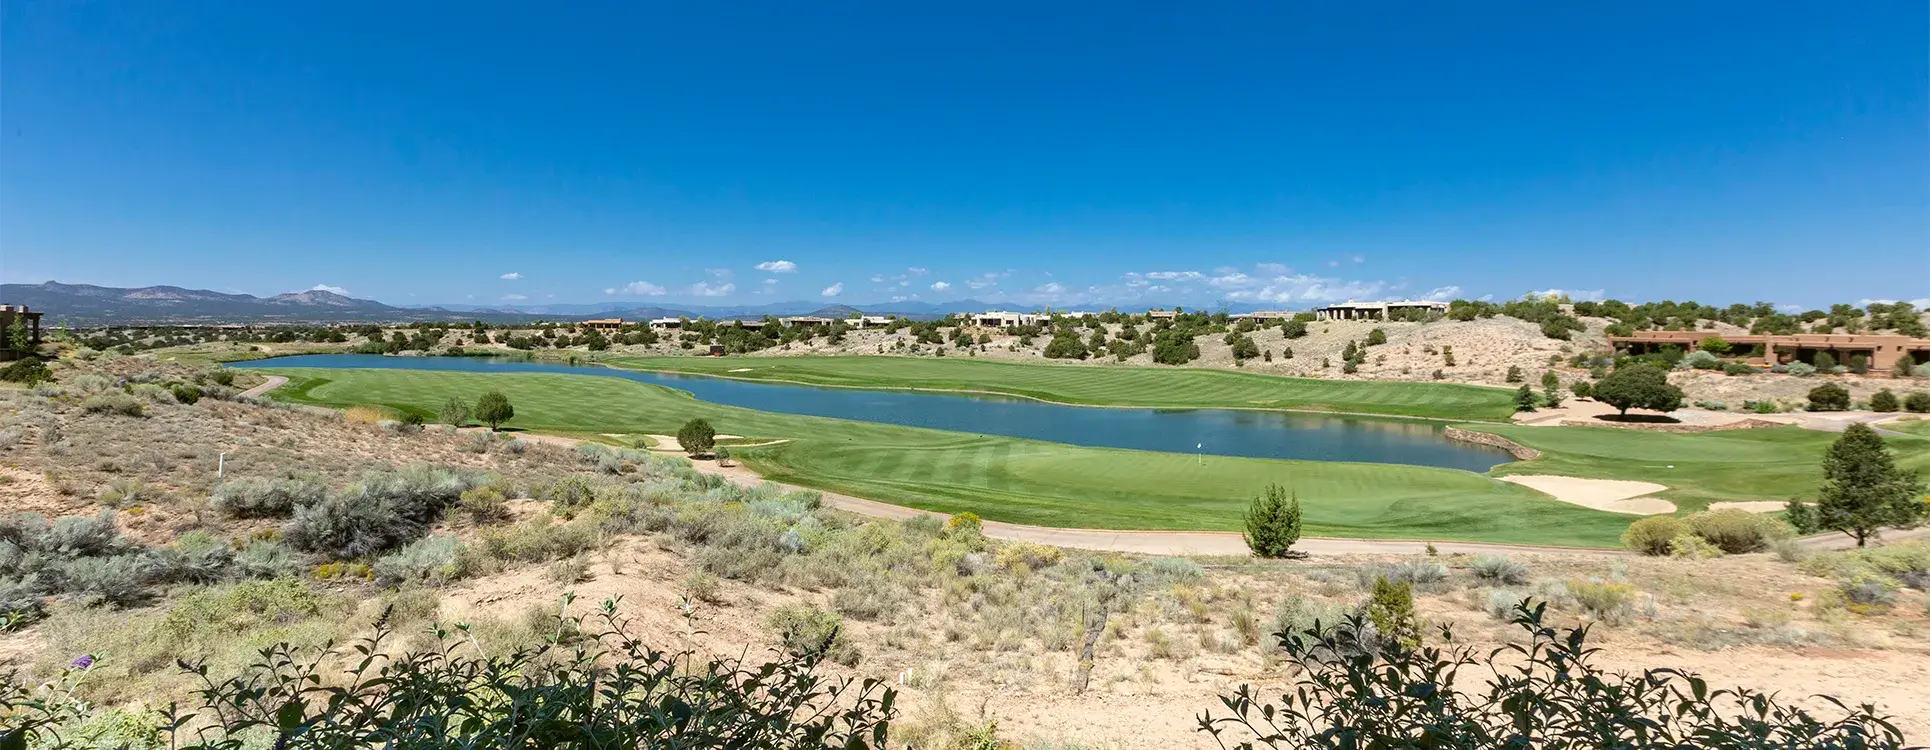 View of stunning Santa Fe golf course